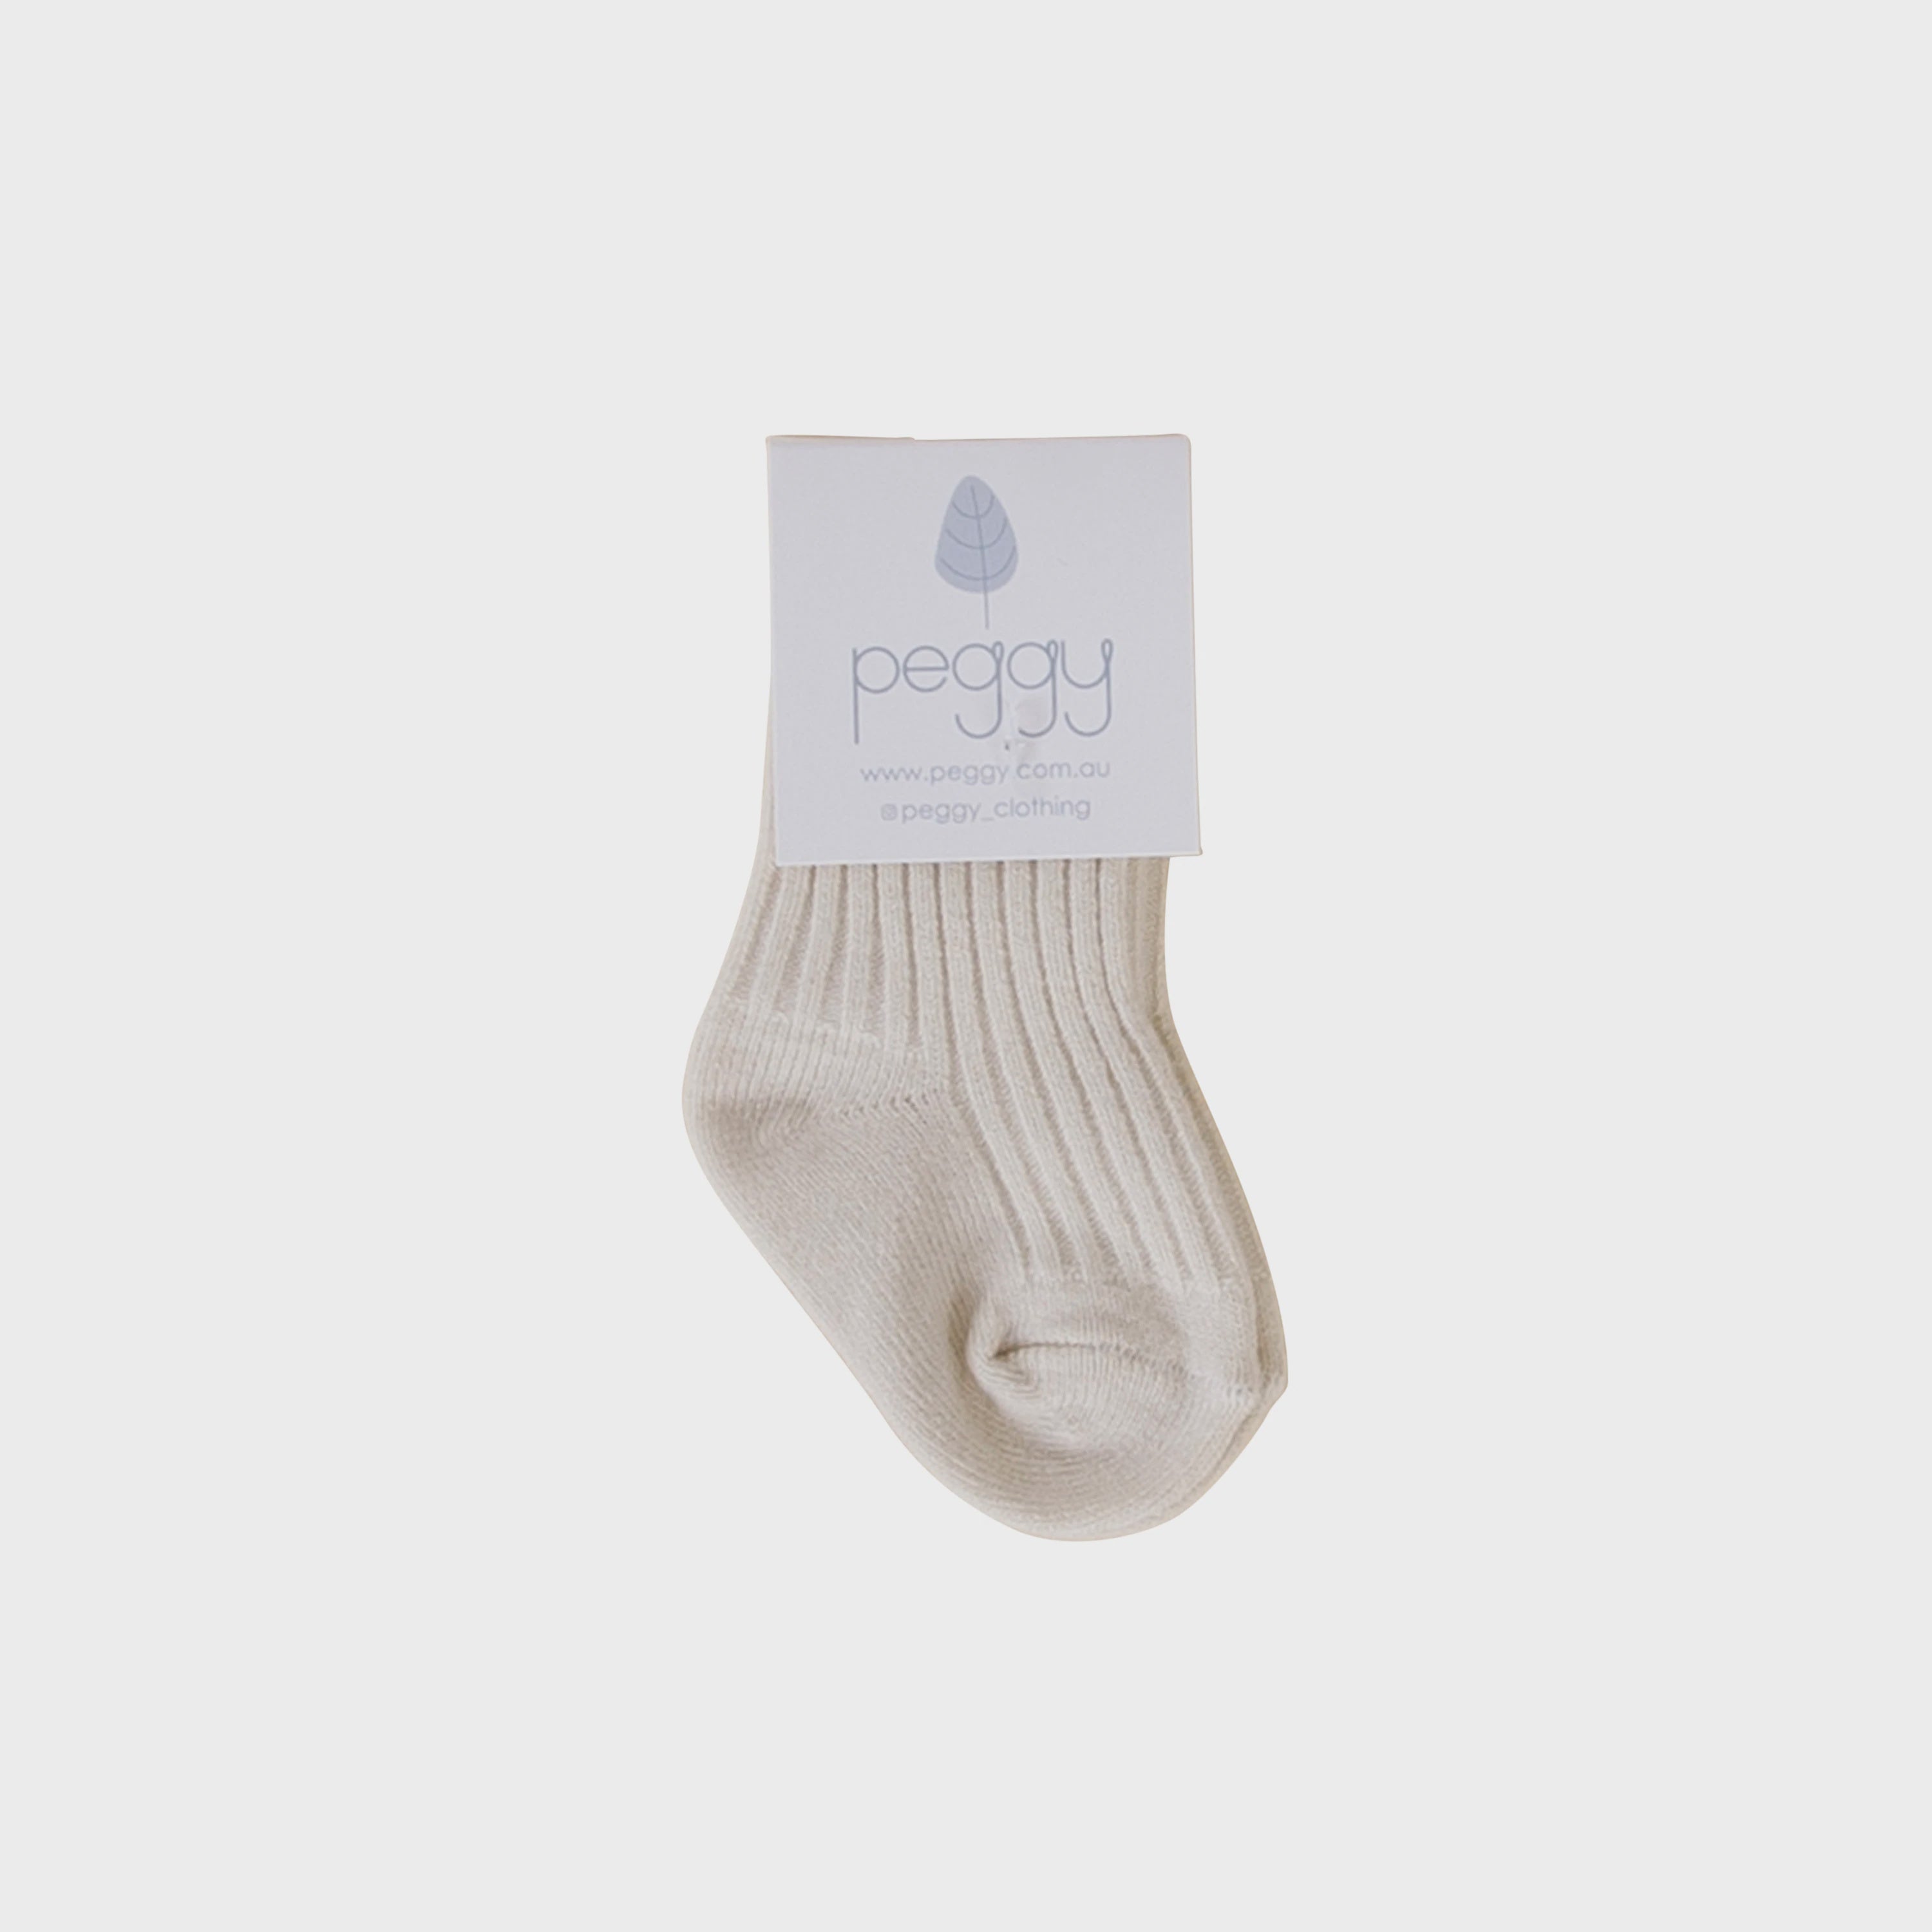 Peggy - Poll Ankle Socks - Taupe